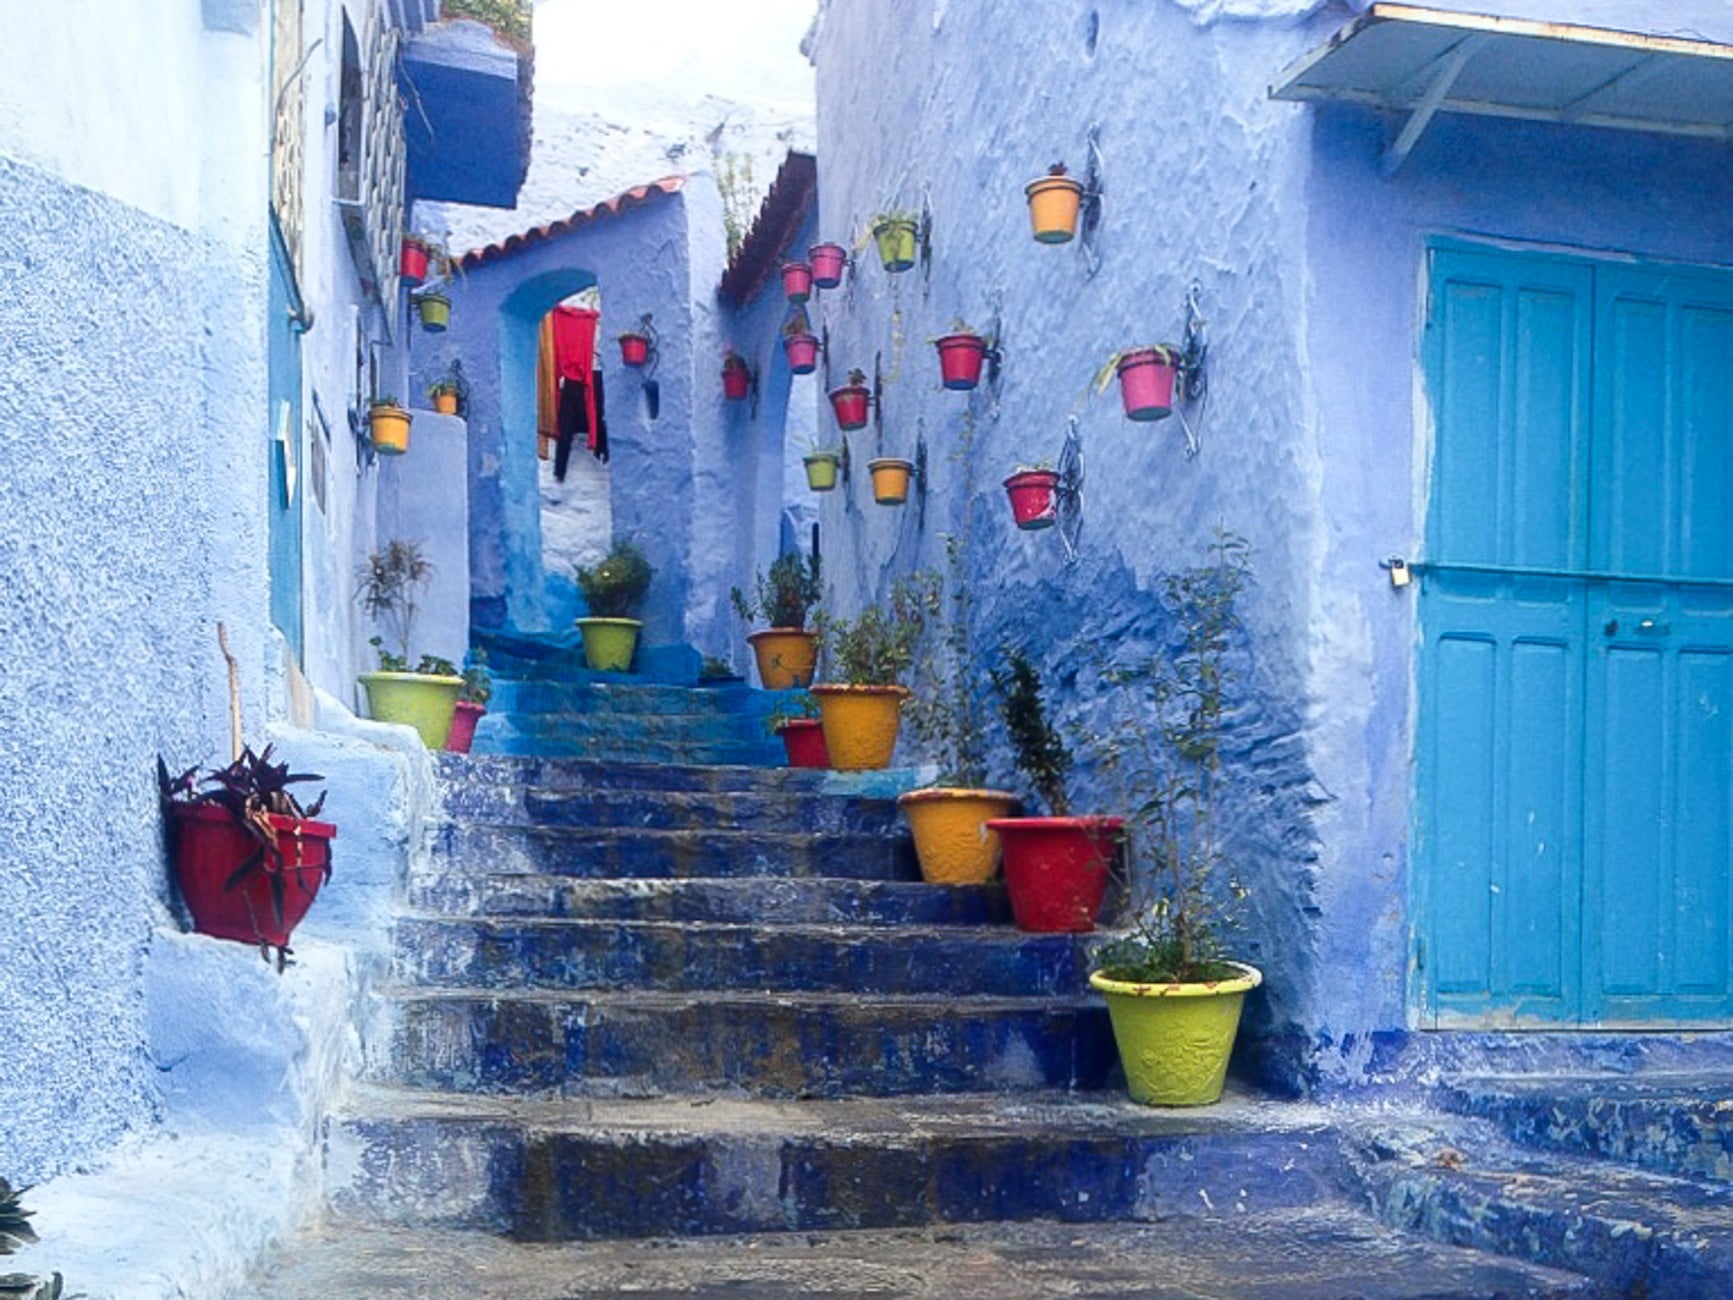 Image shows a stairwell in the Moroccan city of Chefchaouen. The medina is painted blue, with doors and stairs painted different shaes of blue. Along the stairwell, brightly coloured flowerpots hang against walls.